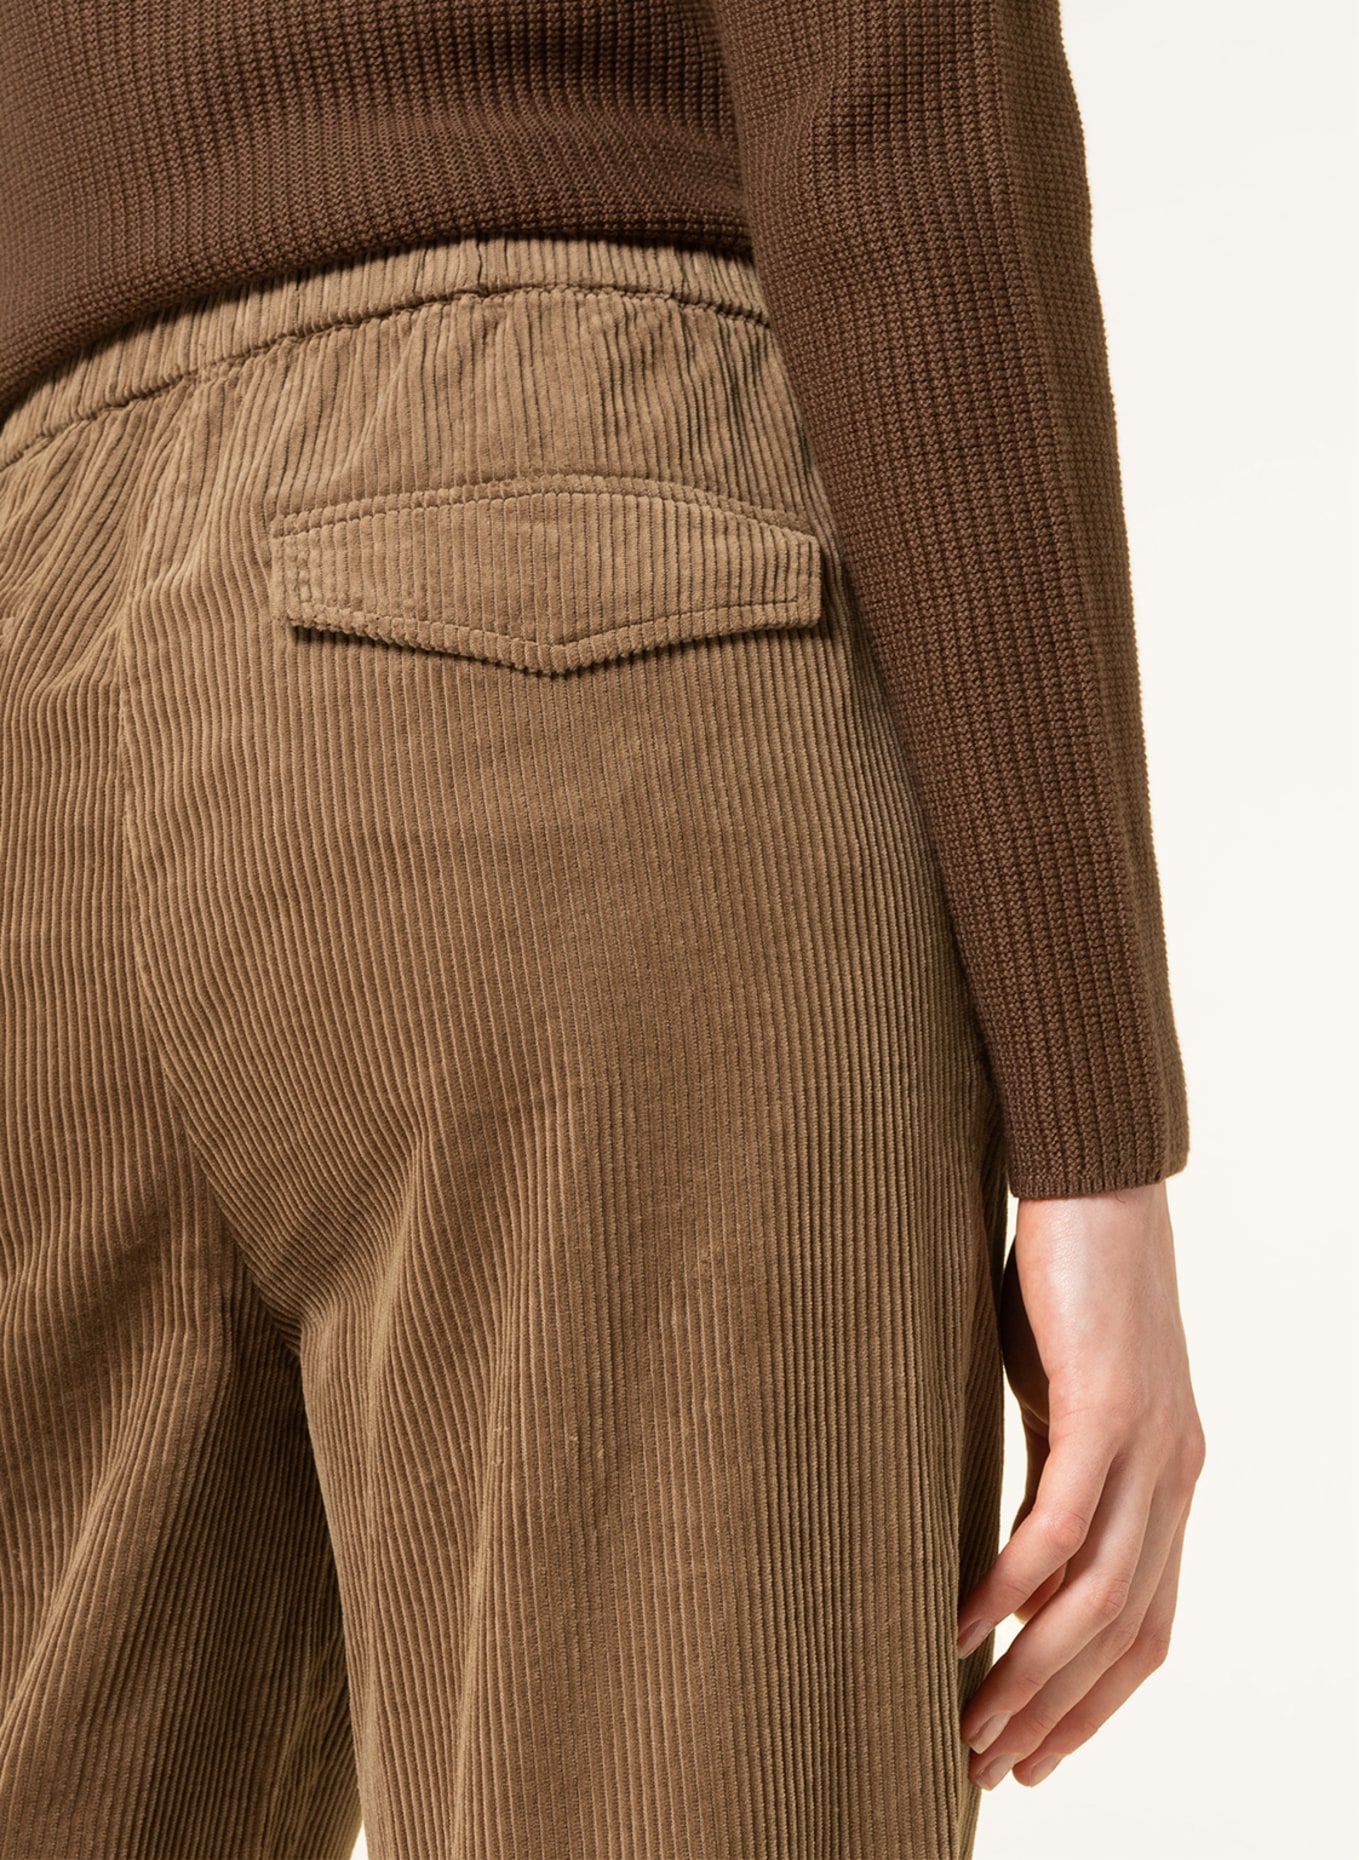 Timberland Trousers for Women  Vestiaire Collective